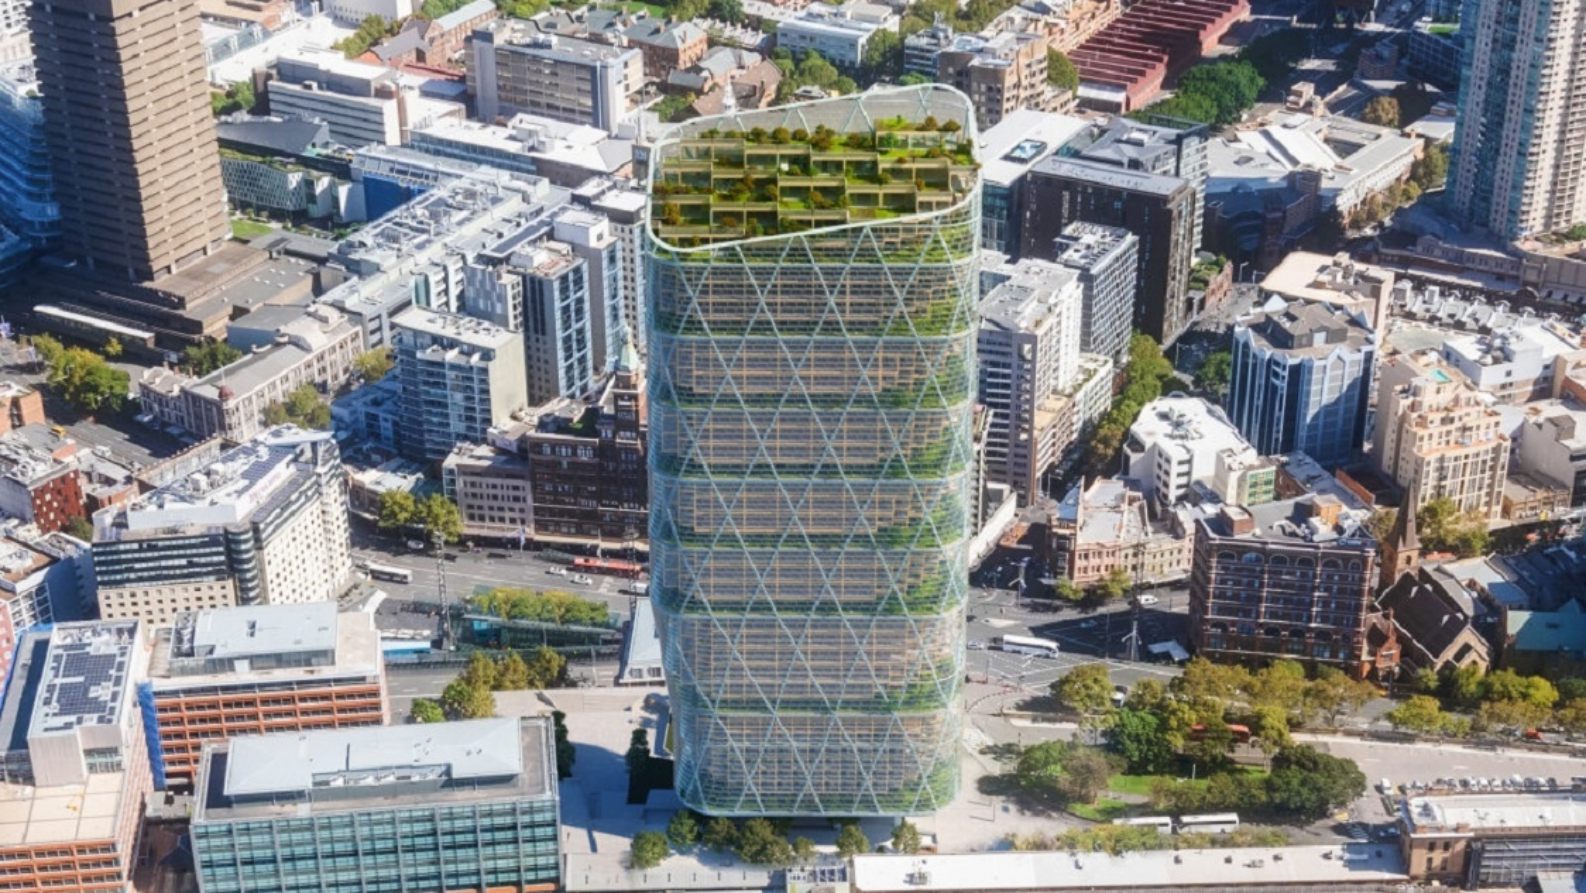 sydney-will-be-getting-the-world’s-tallest-building-made-of-‘hybrid-timber’